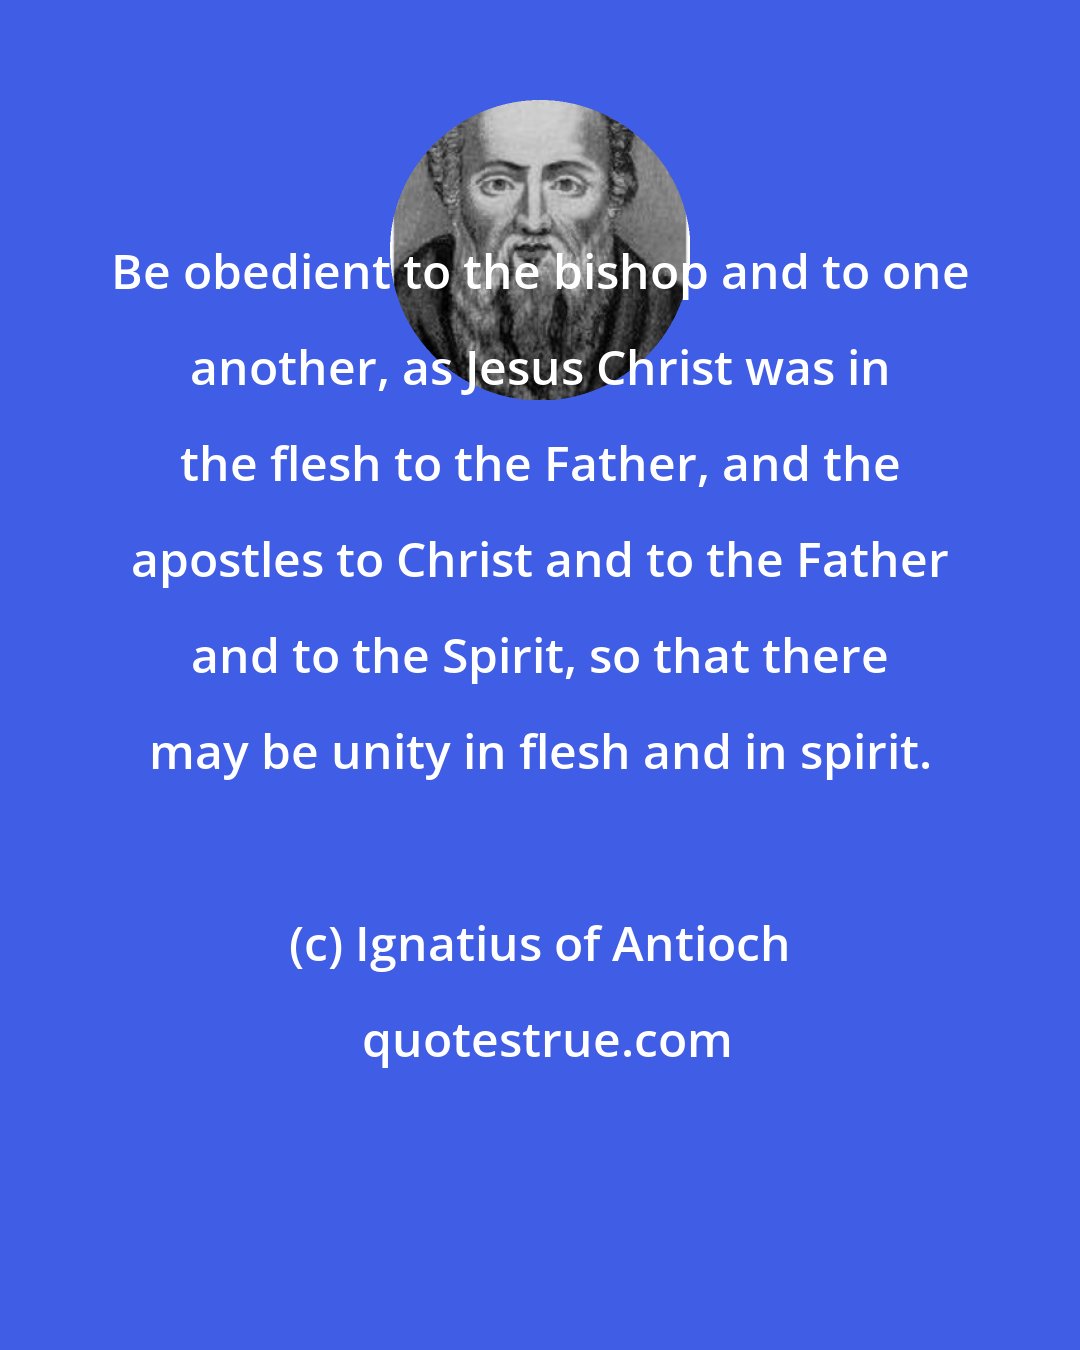 Ignatius of Antioch: Be obedient to the bishop and to one another, as Jesus Christ was in the flesh to the Father, and the apostles to Christ and to the Father and to the Spirit, so that there may be unity in flesh and in spirit.